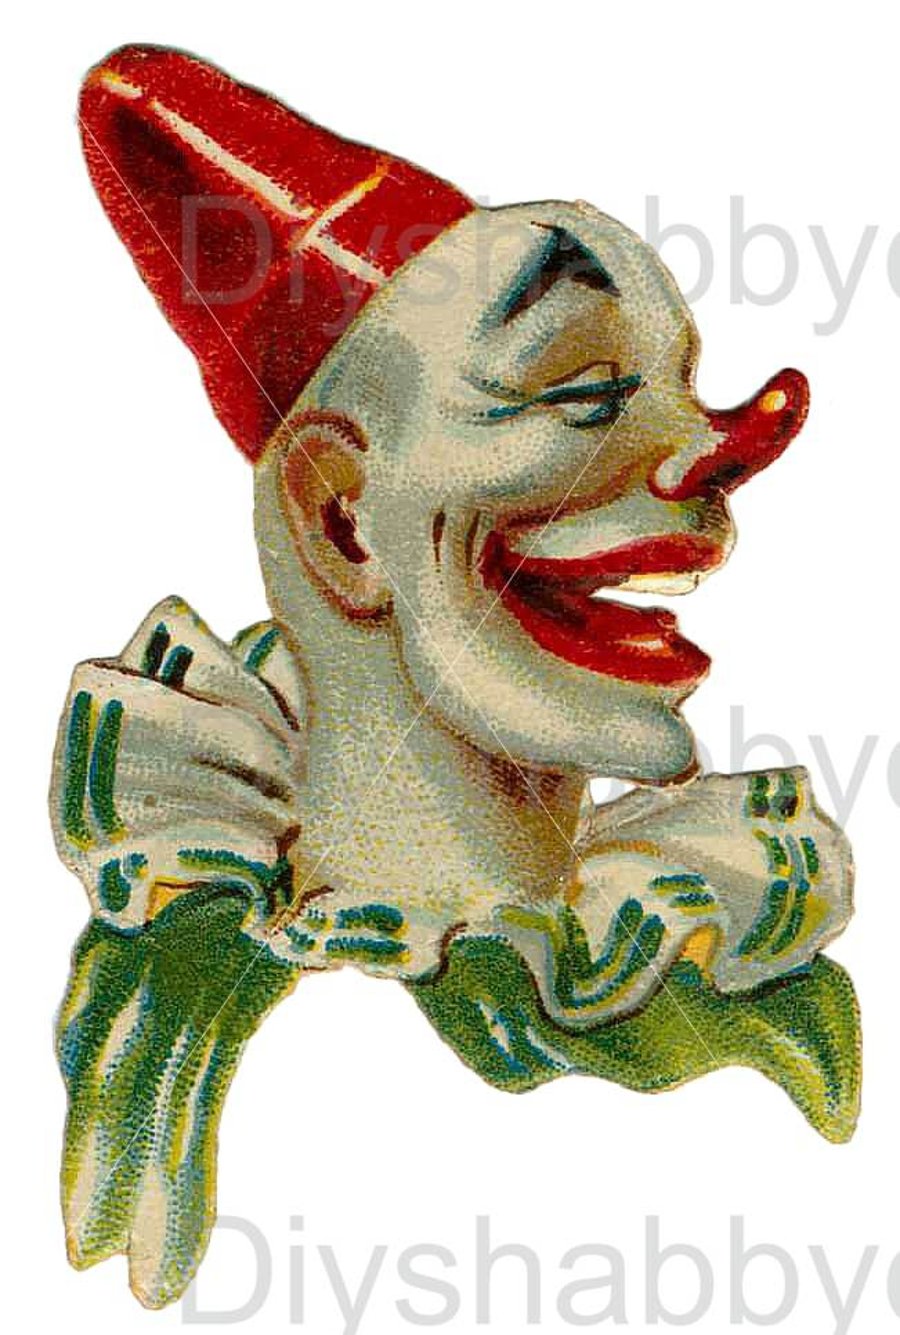 Waterslide Furniture Decal Vintage Image Transfer DIY Shabby Chic Laughing Clown